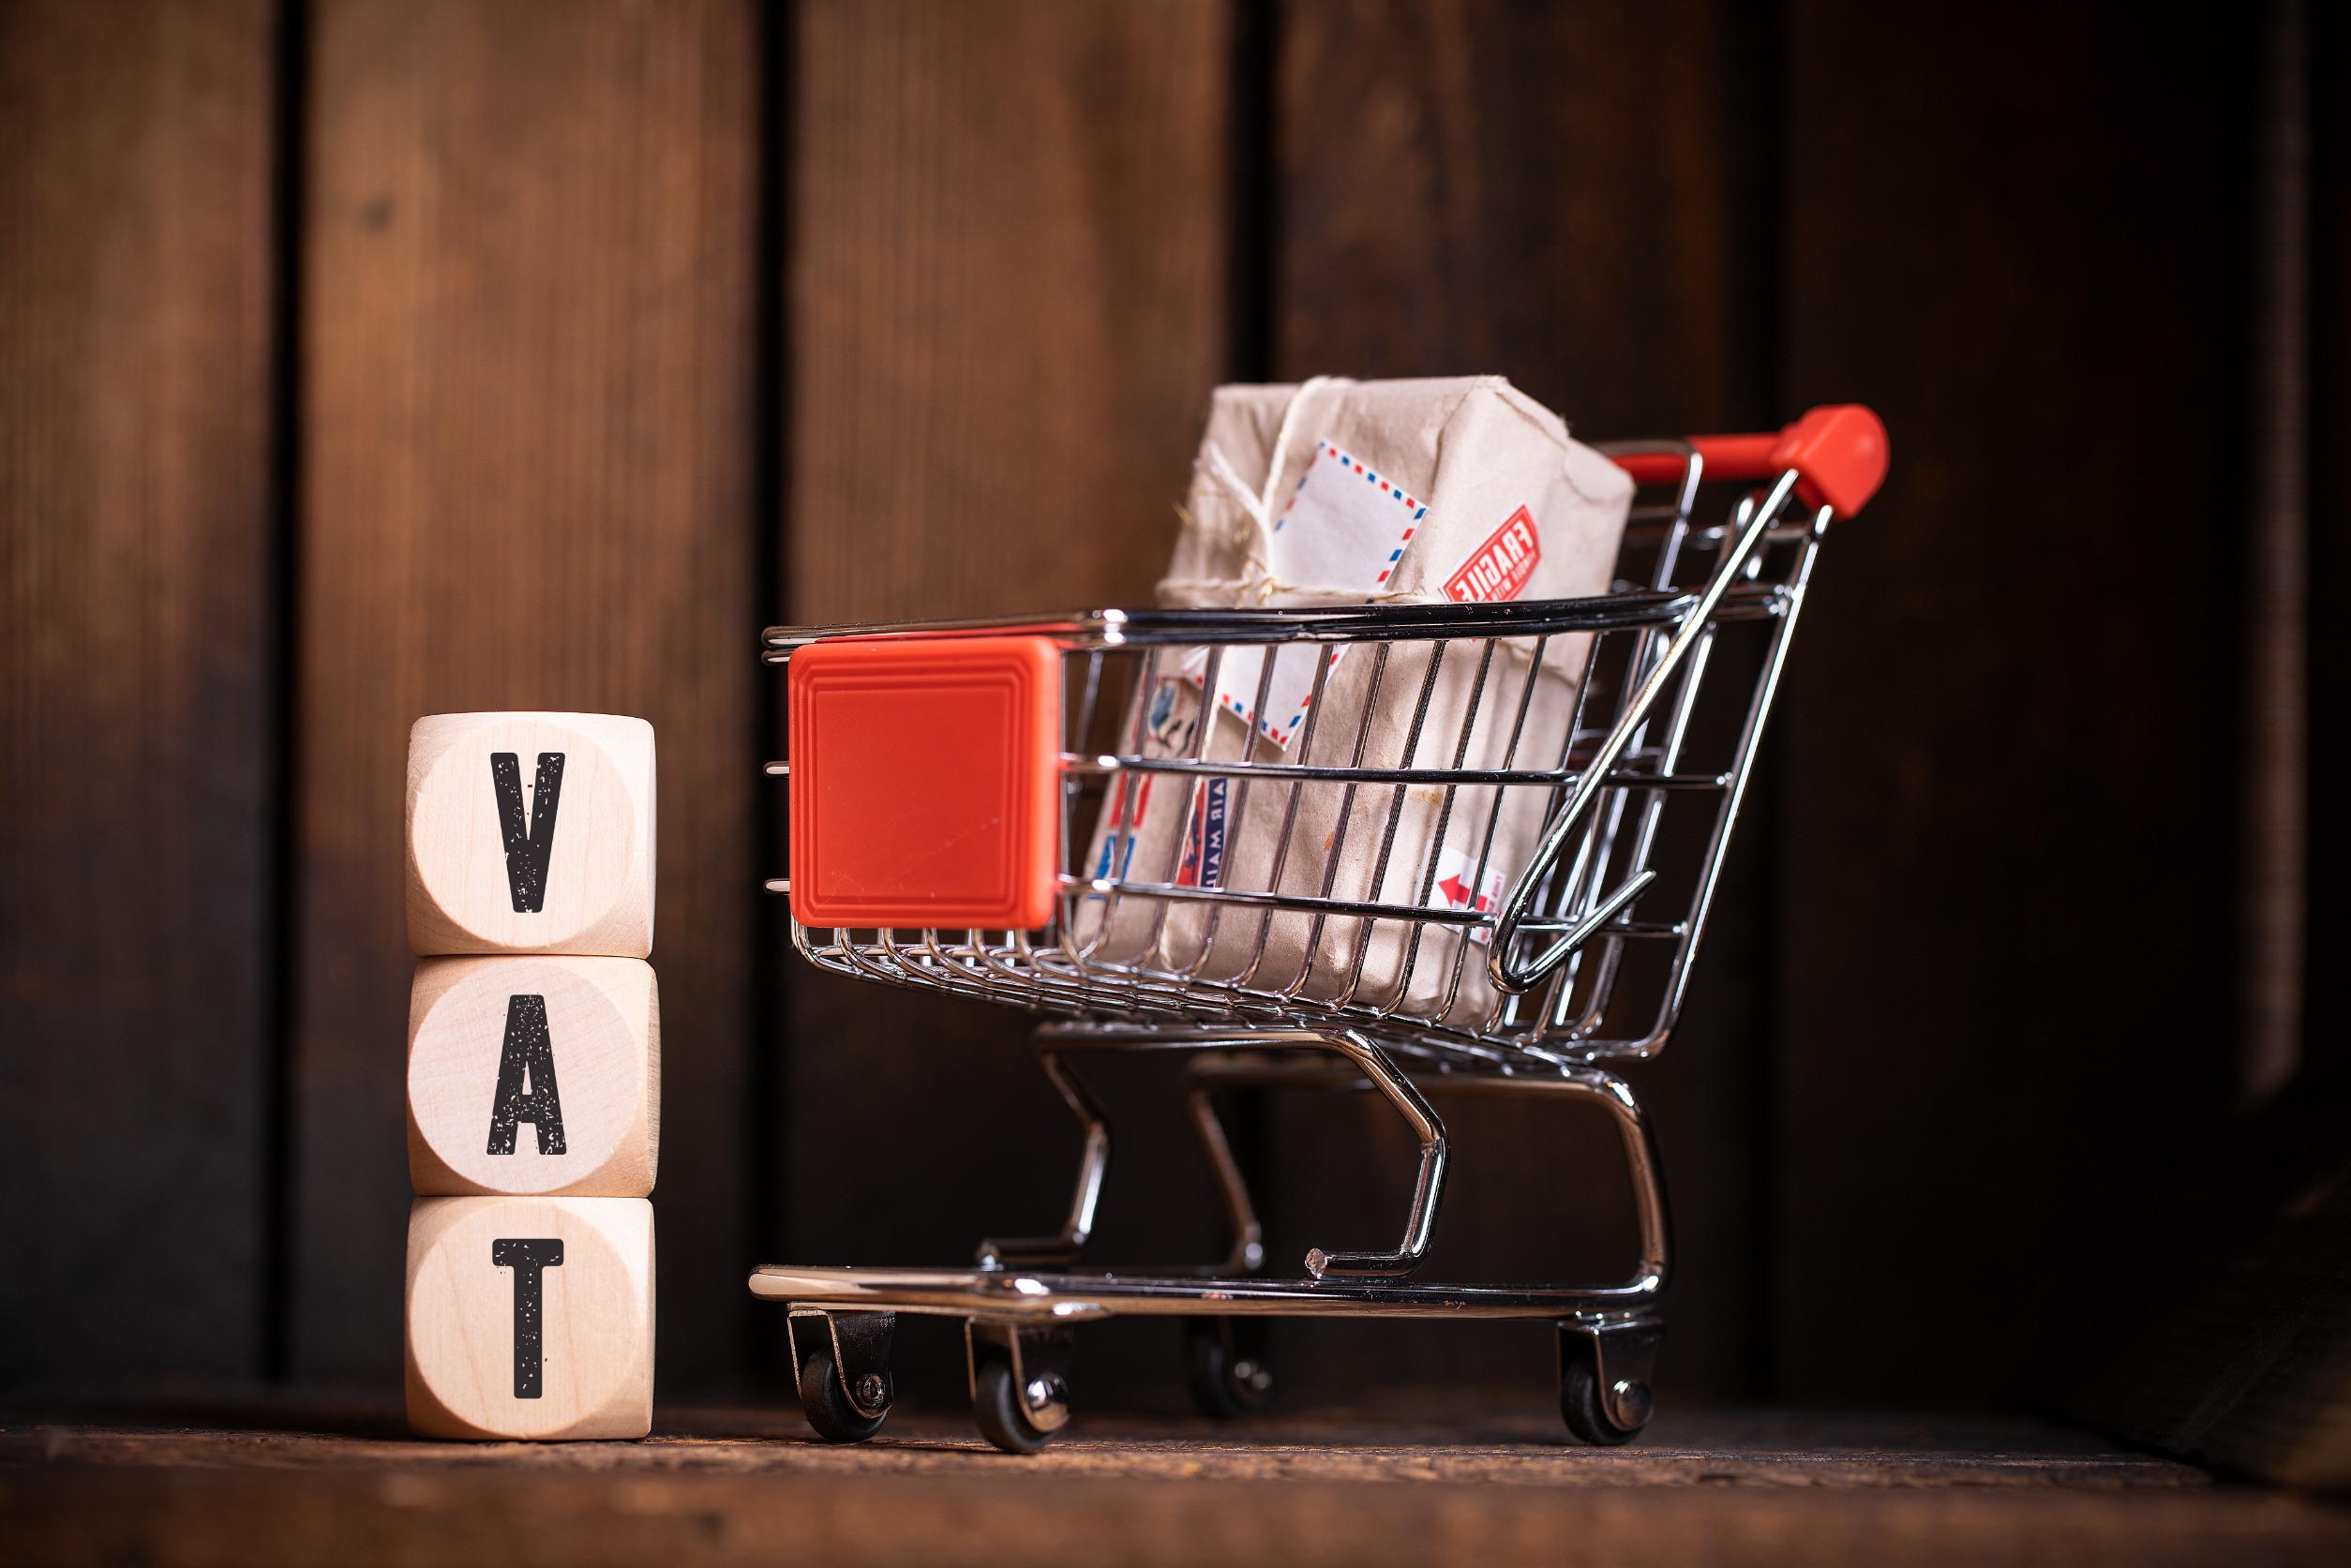 New VAT Surcharge Penalties in force from 7th March